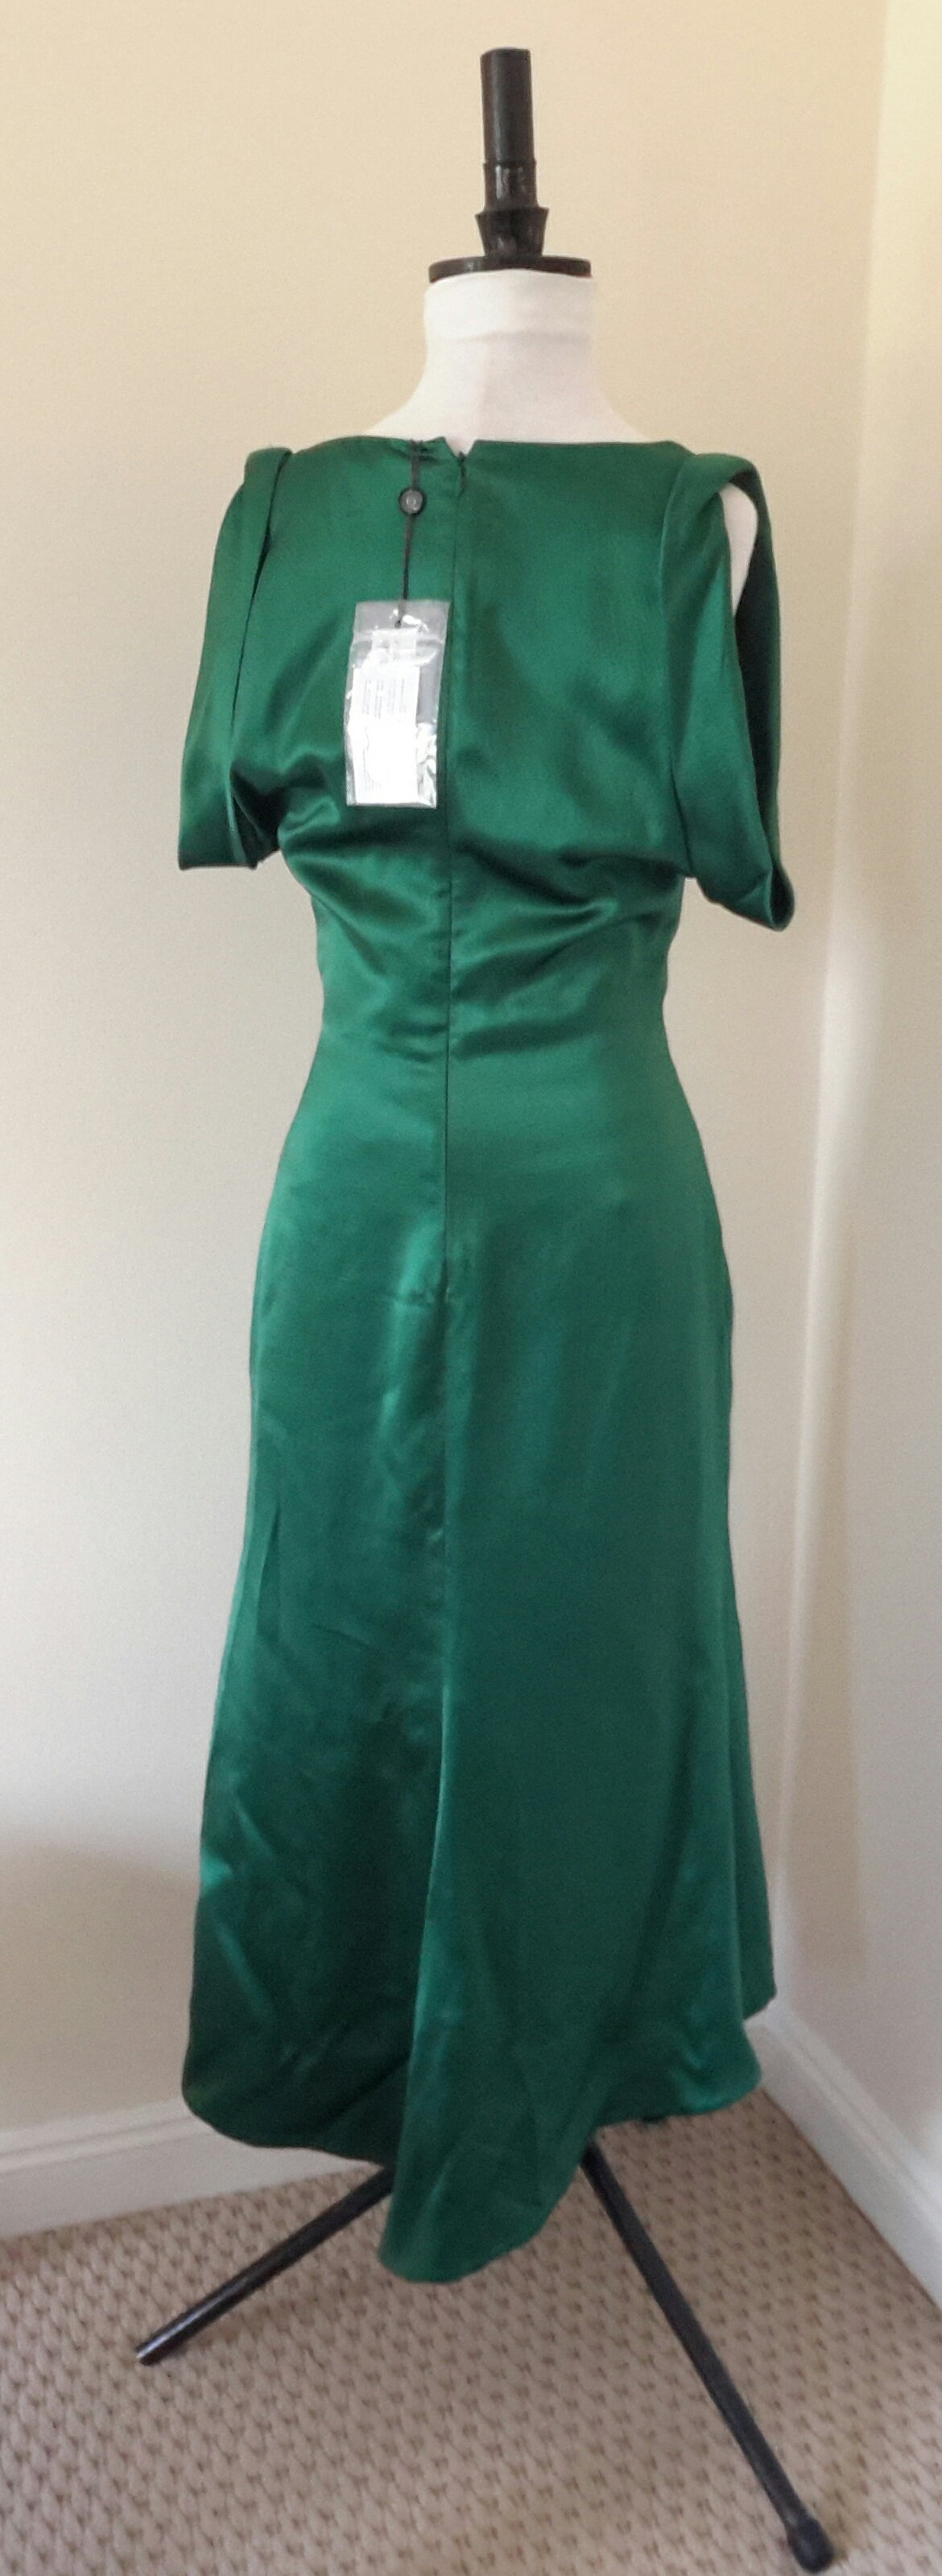 Alexander Mcqueens best work from 2007. Fishtail drop hem, sumptuous light reflecting silk. Tags still attached, labeled IT38 which is XS.

Please note this dress does have runs in the silk, has only been tried on since being bought. Thing is, the